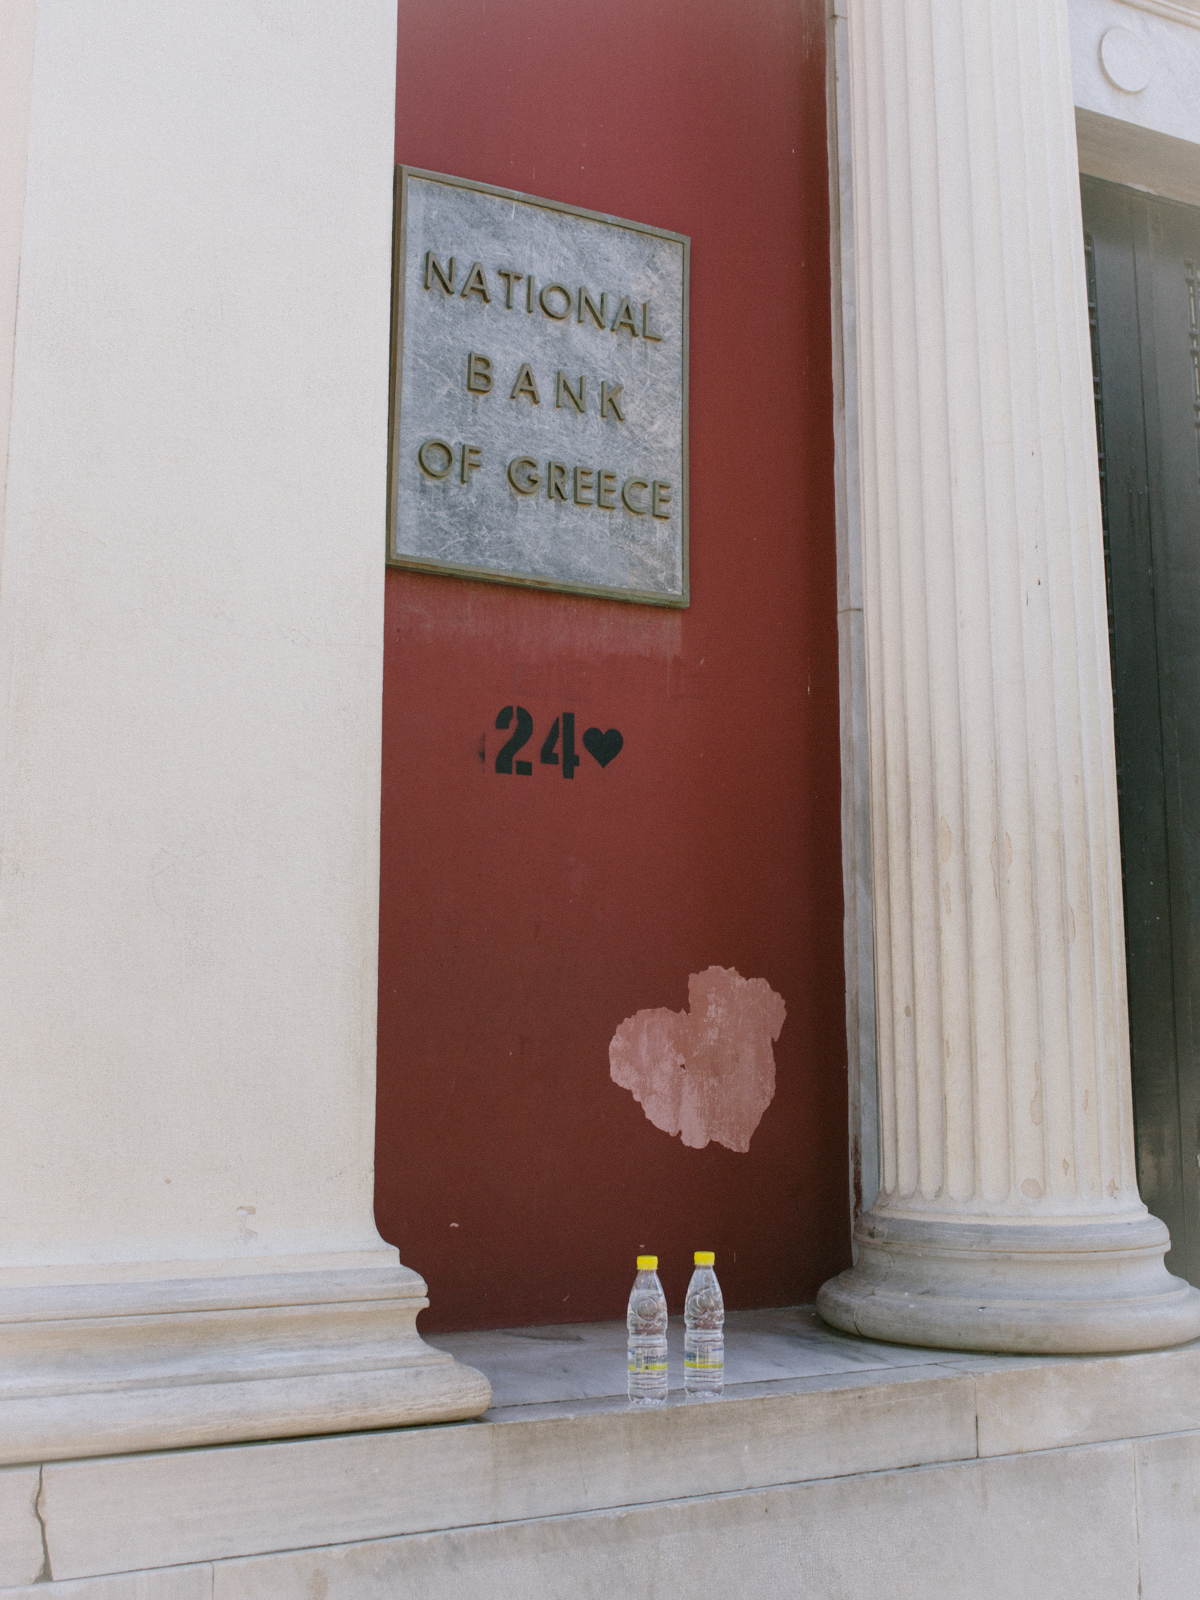 BENJAMIN MARKSTEIN There is a little bit of yellow in Greece